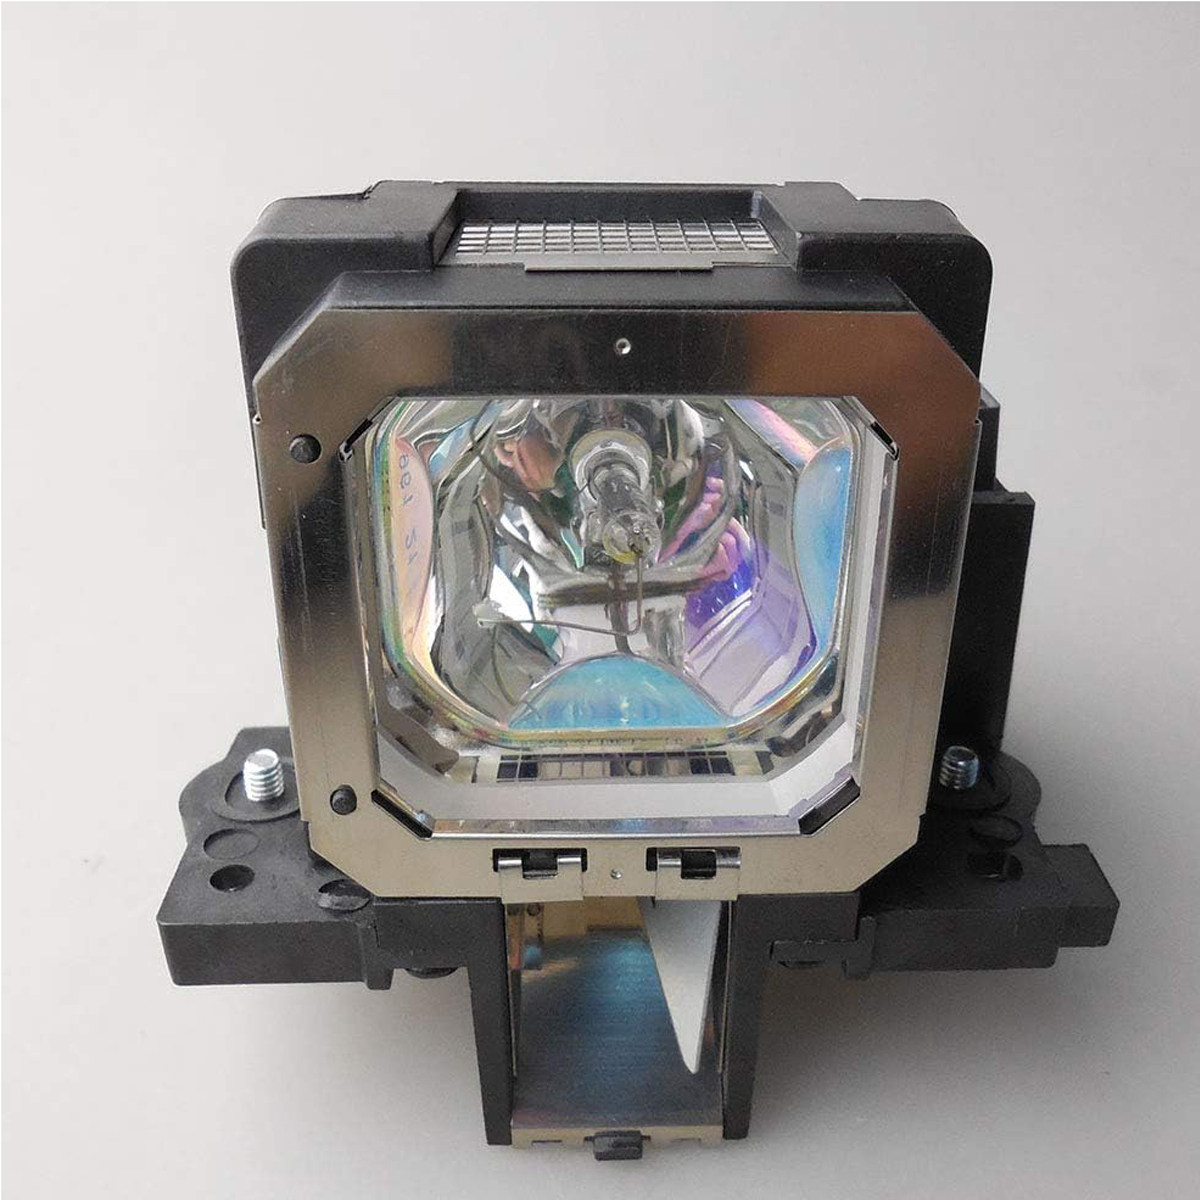 Replacement Projector lamp PK-L2312U For JVC DLA-X55RDLA-RS46 DLA-RS48